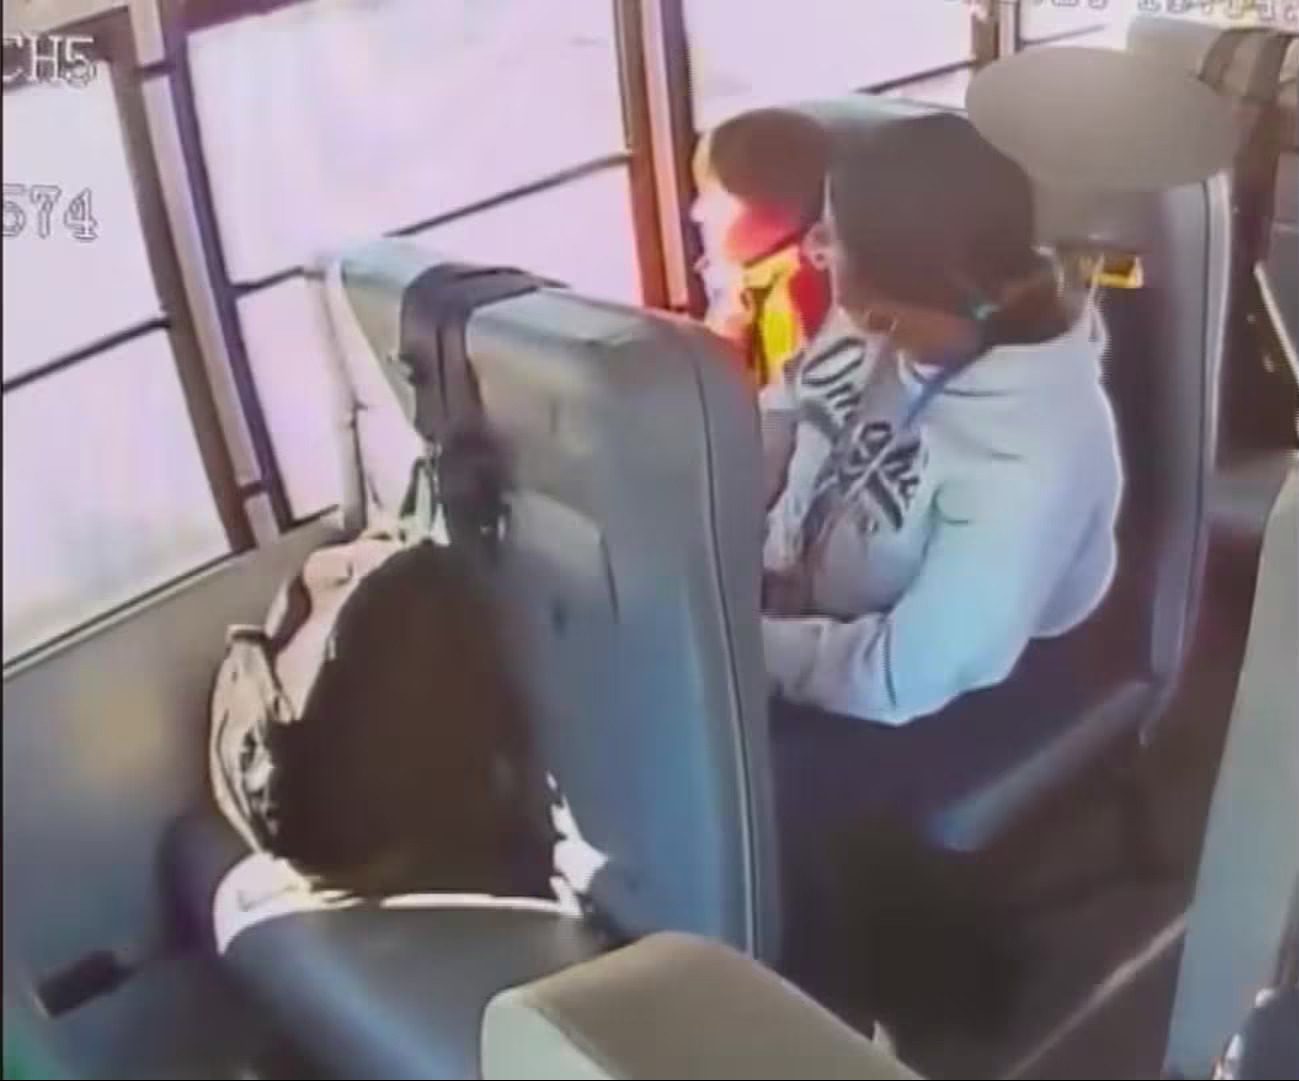 Colorado Bus Aide Arrested for Assaulting Nonverbal Boy, Incident Captured on Camera